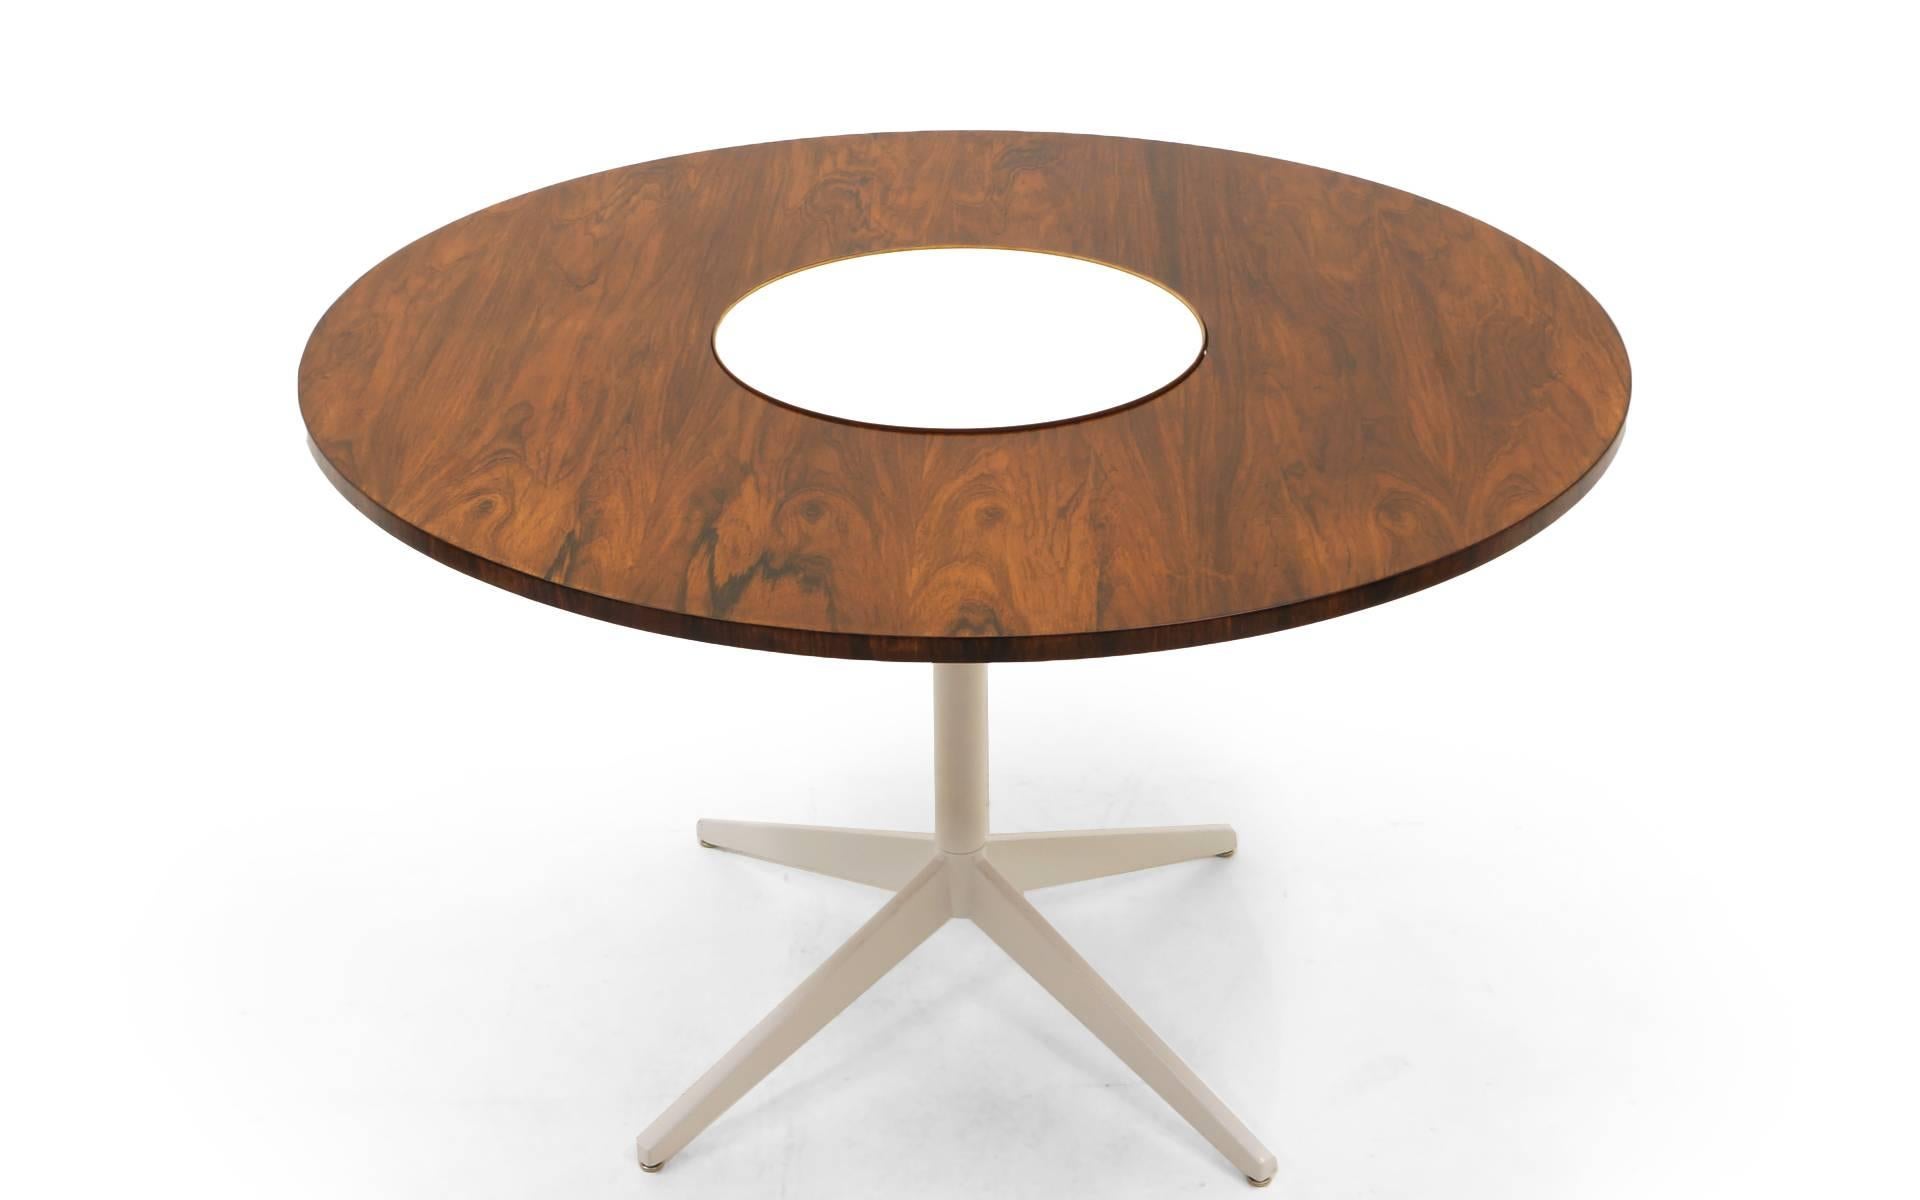 Early, rare rosewood lazy susan dining table designed by George Nelson for Herman Miller. The center white laminate area is a lazy susan so it turns in a circular motion. This is the only example we have ever seen with a rosewood top. 
Lazy Susan